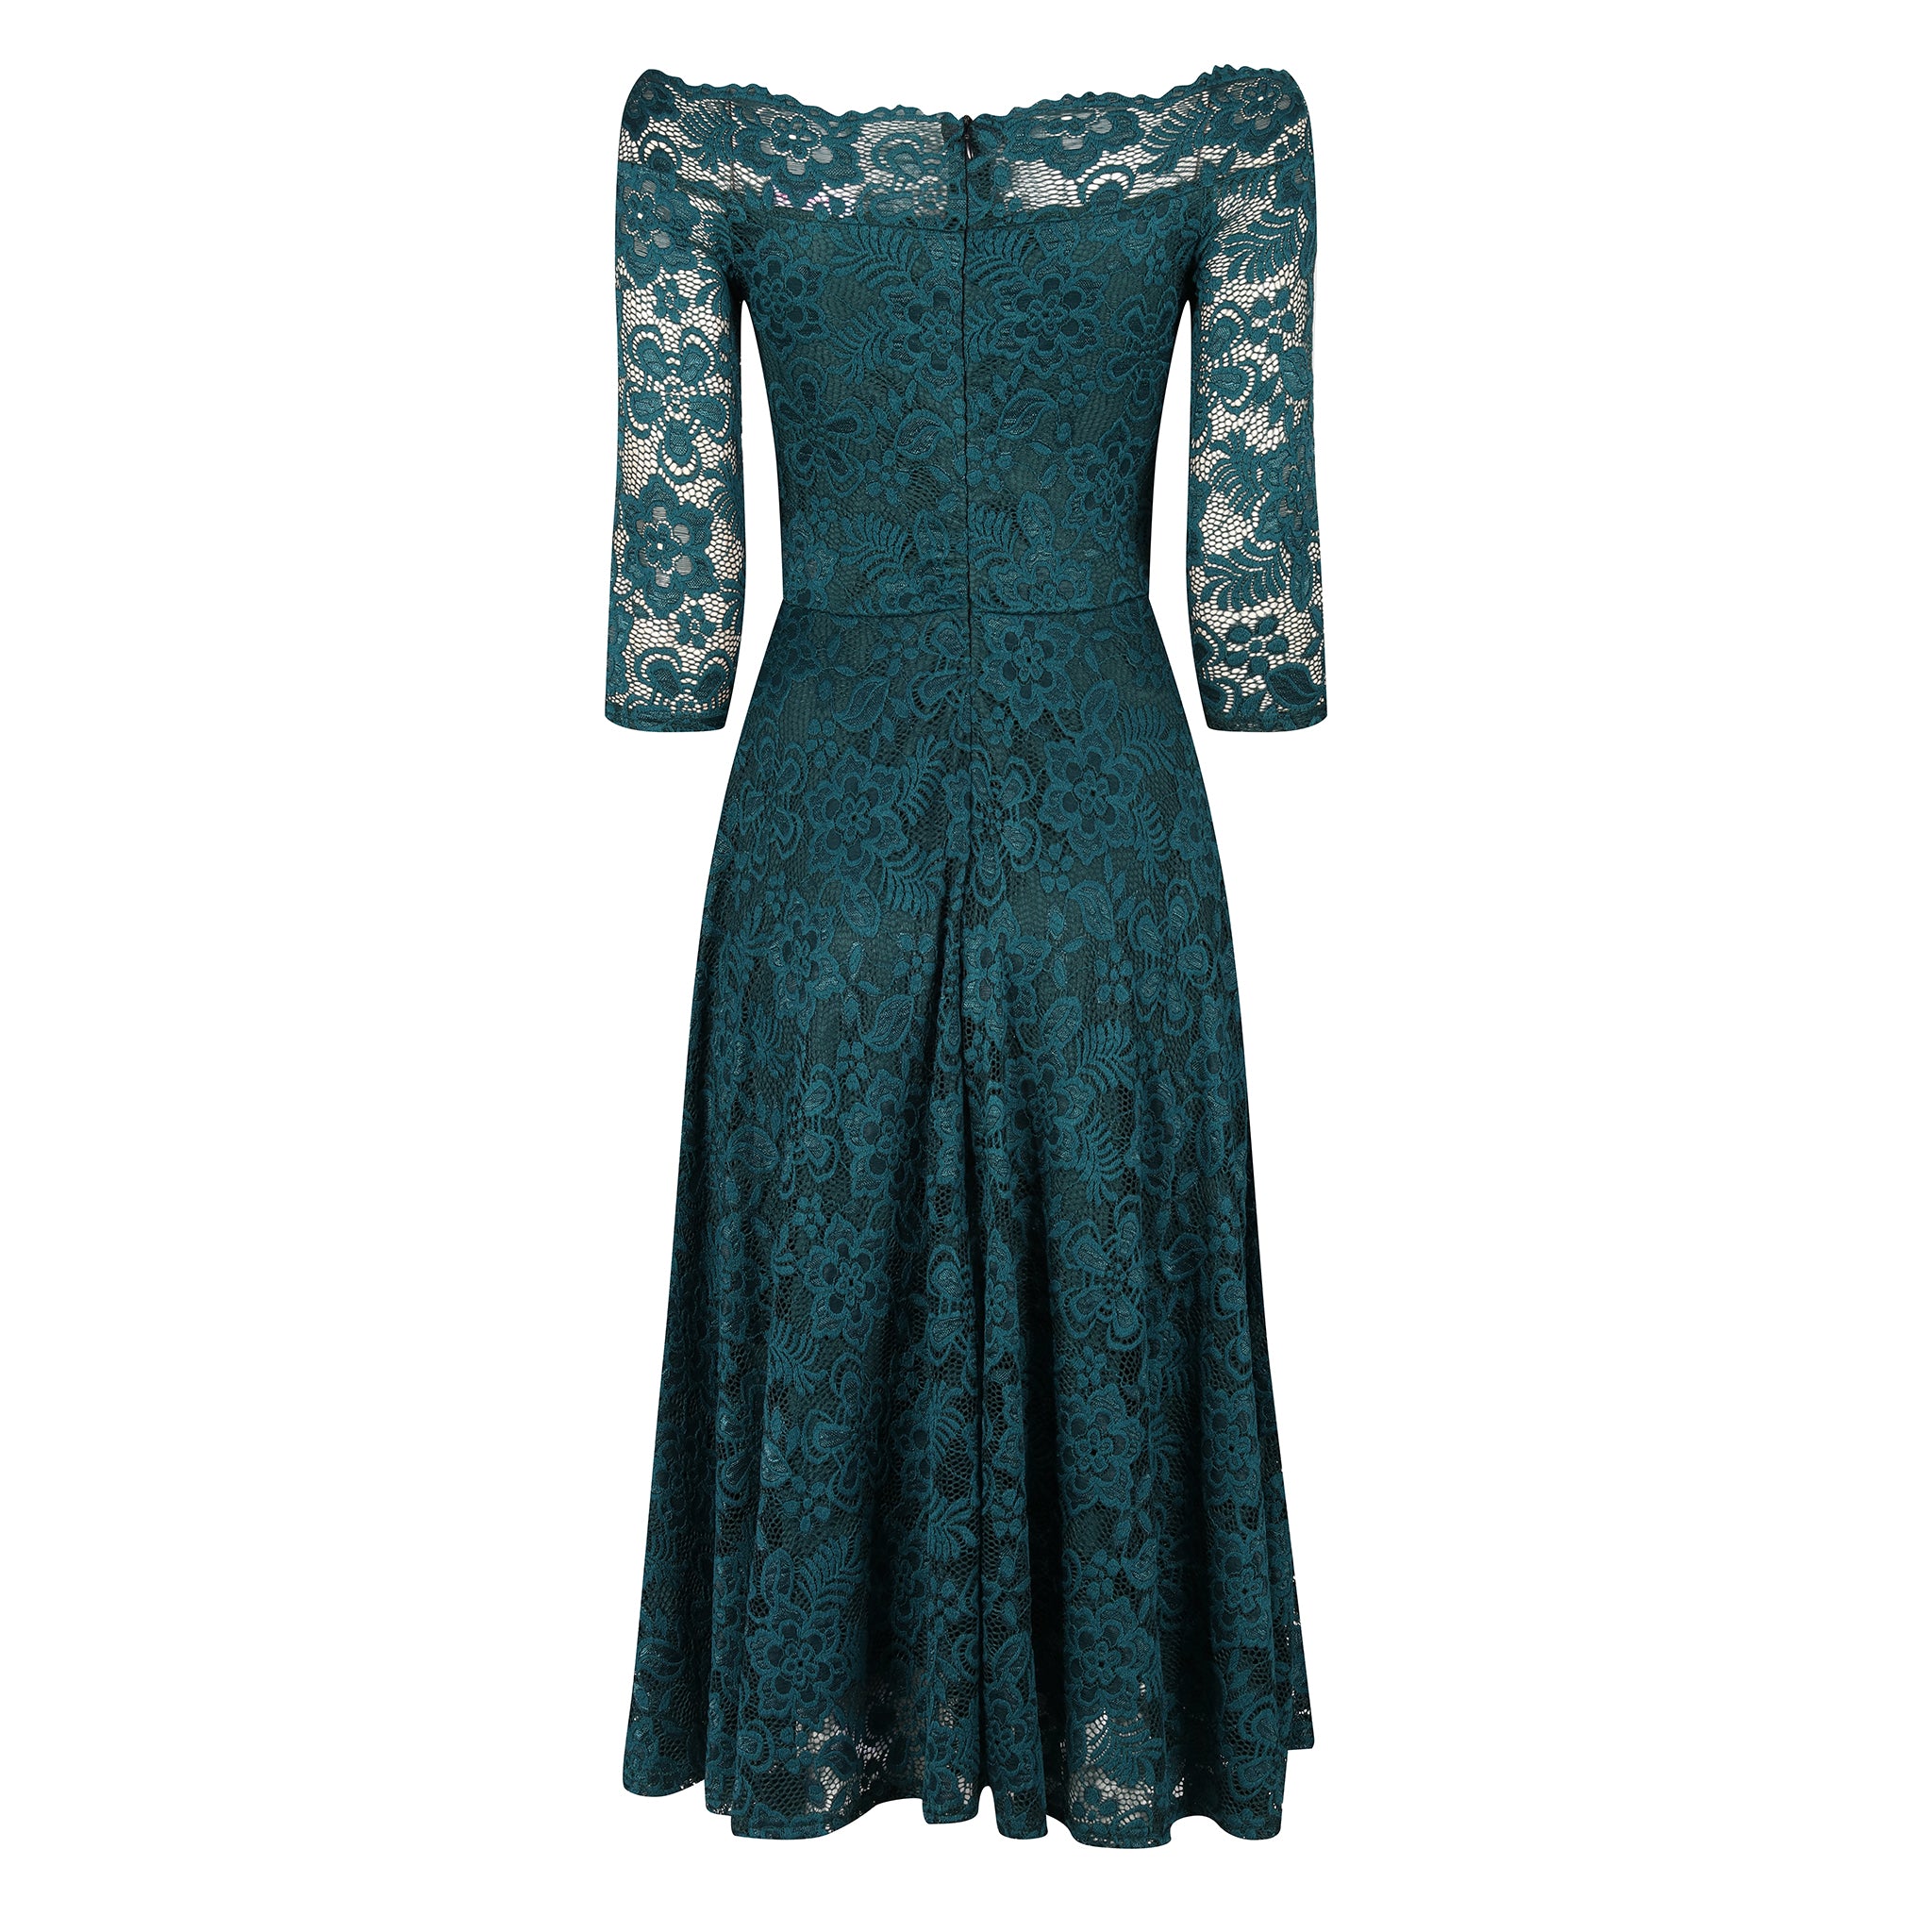 Emerald Green Lace Vintage Style Swing Dress With 3/4 Sleeves & Boat Neck